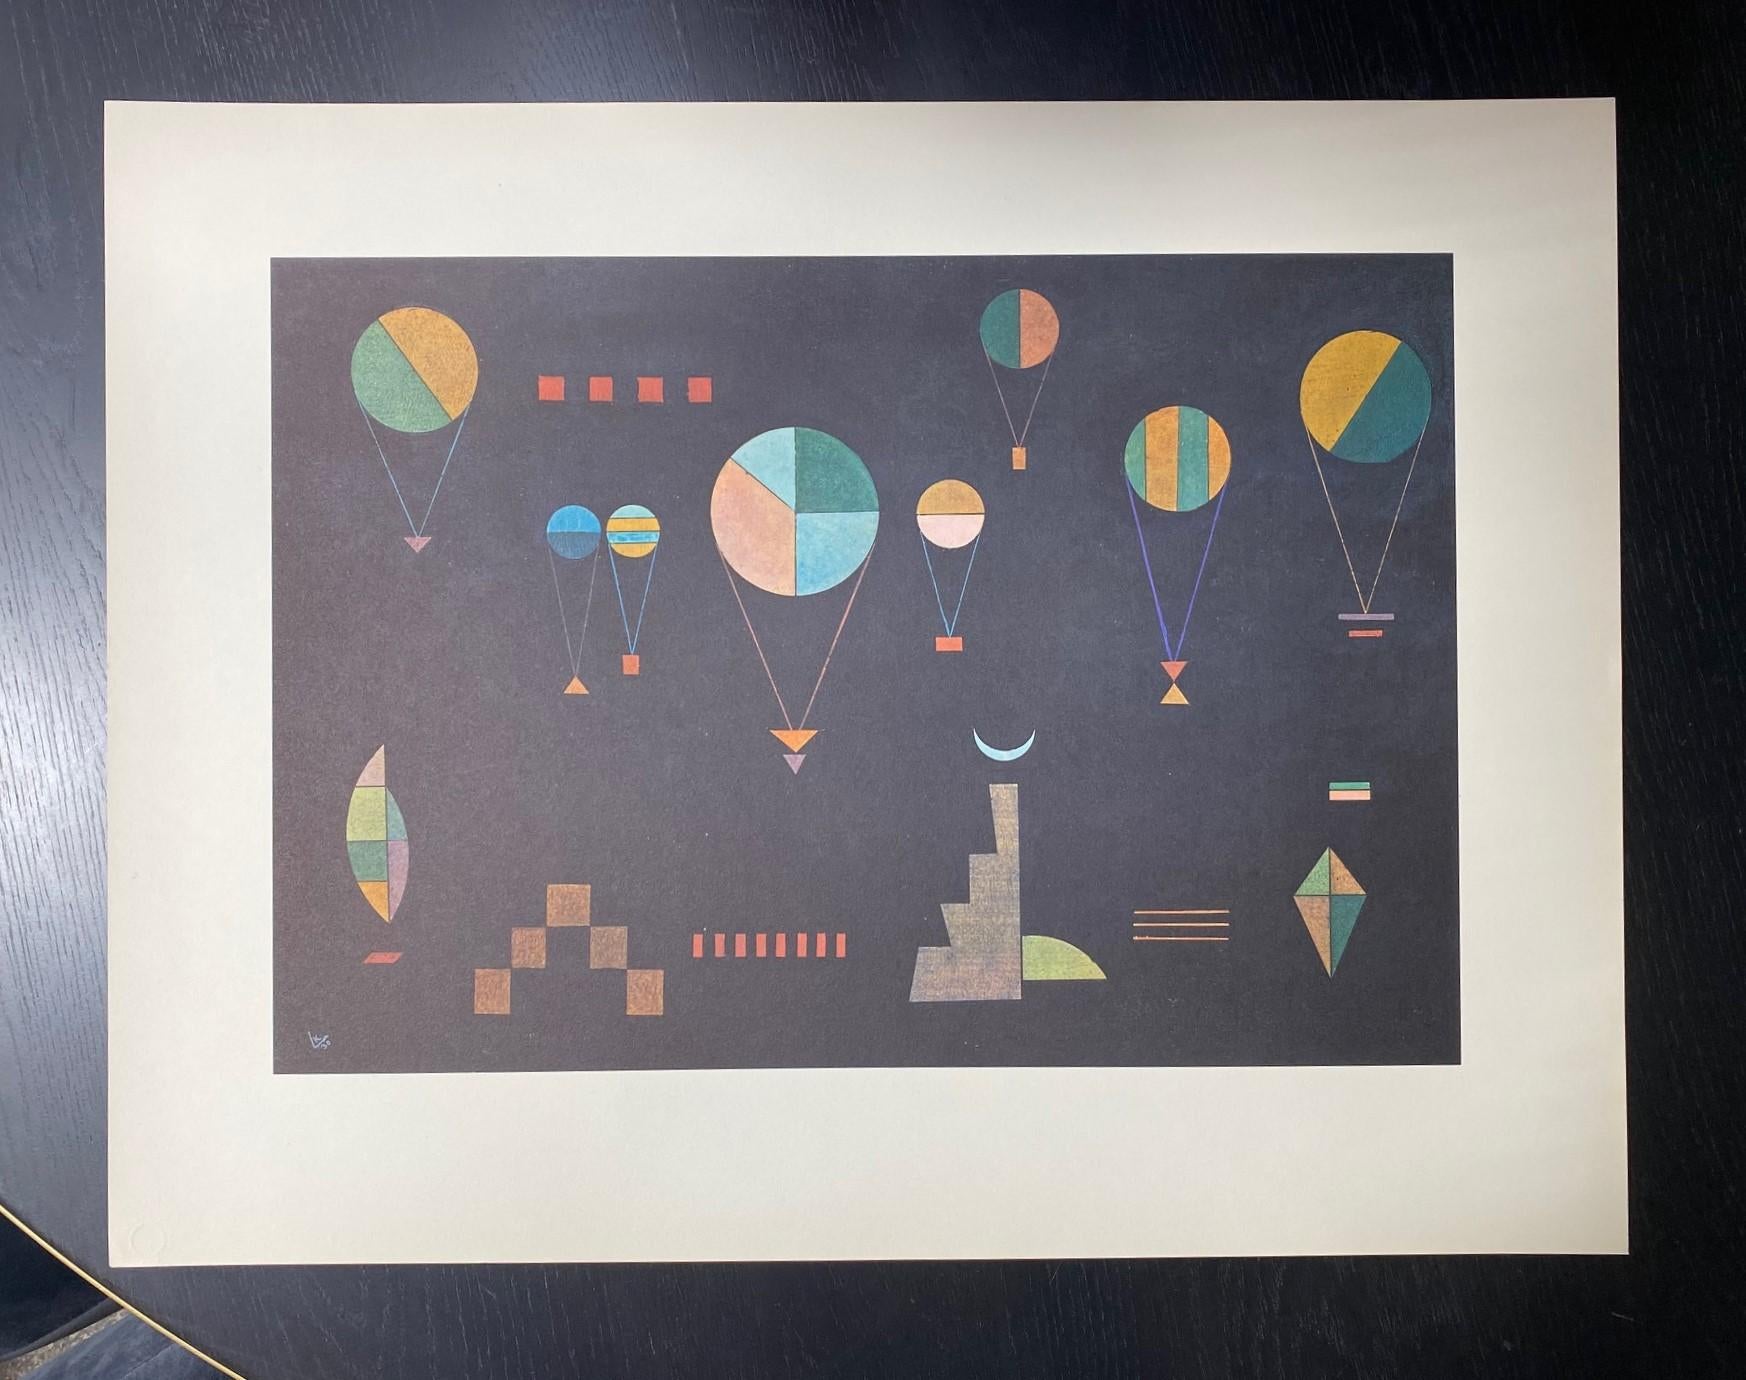 A beautiful limited edition abstract Expressionism offset lithograph of the Russian painter and art theorist Wassily Kandinsky's 